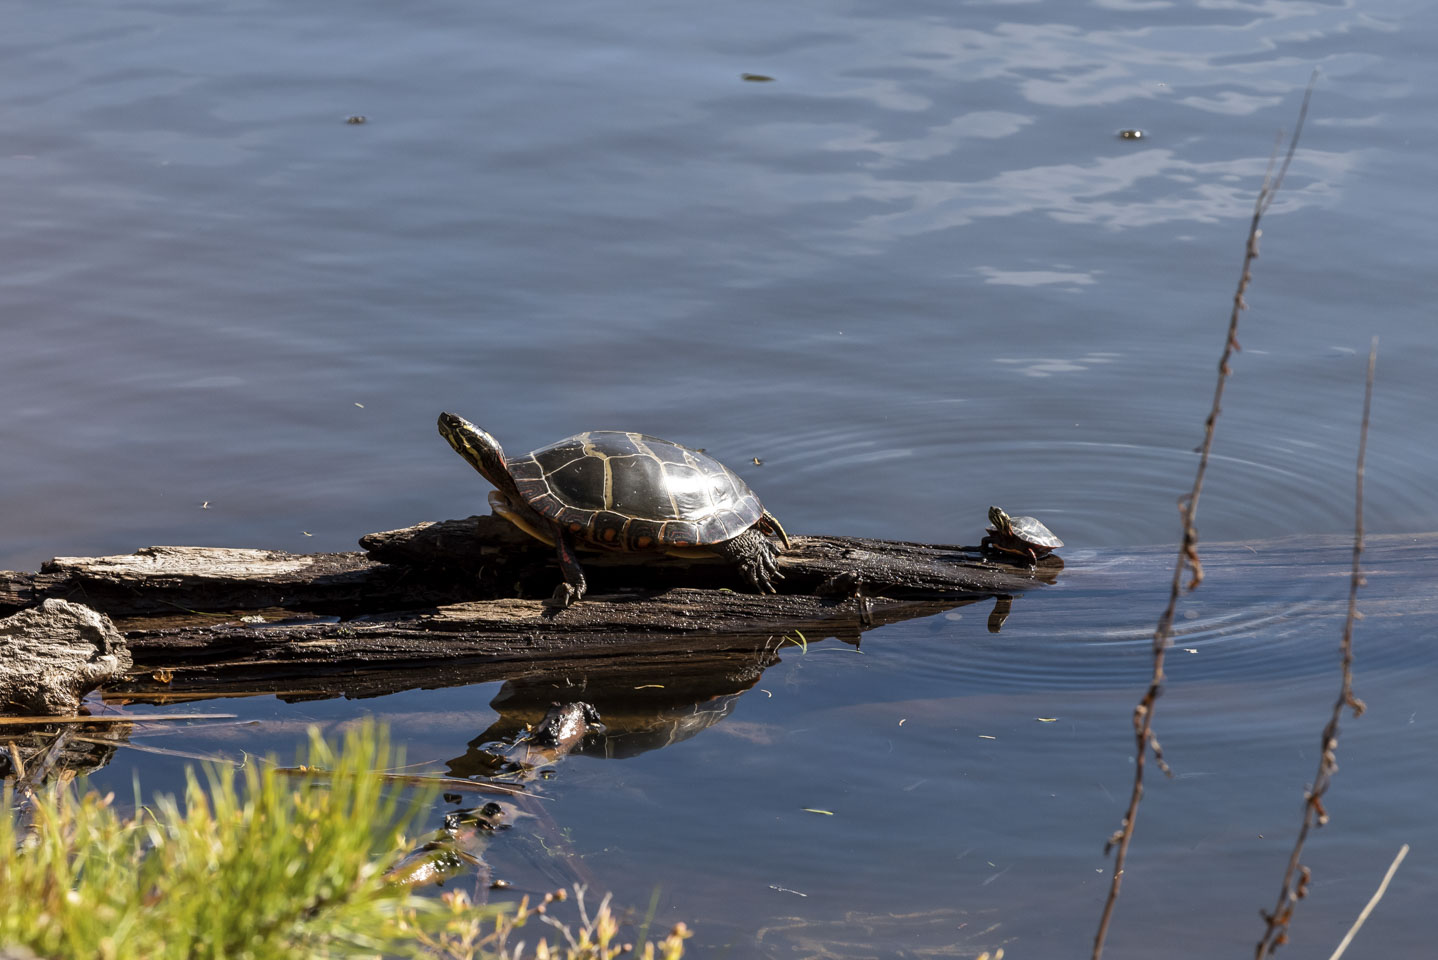 An adult and a juvenile turtle on a log